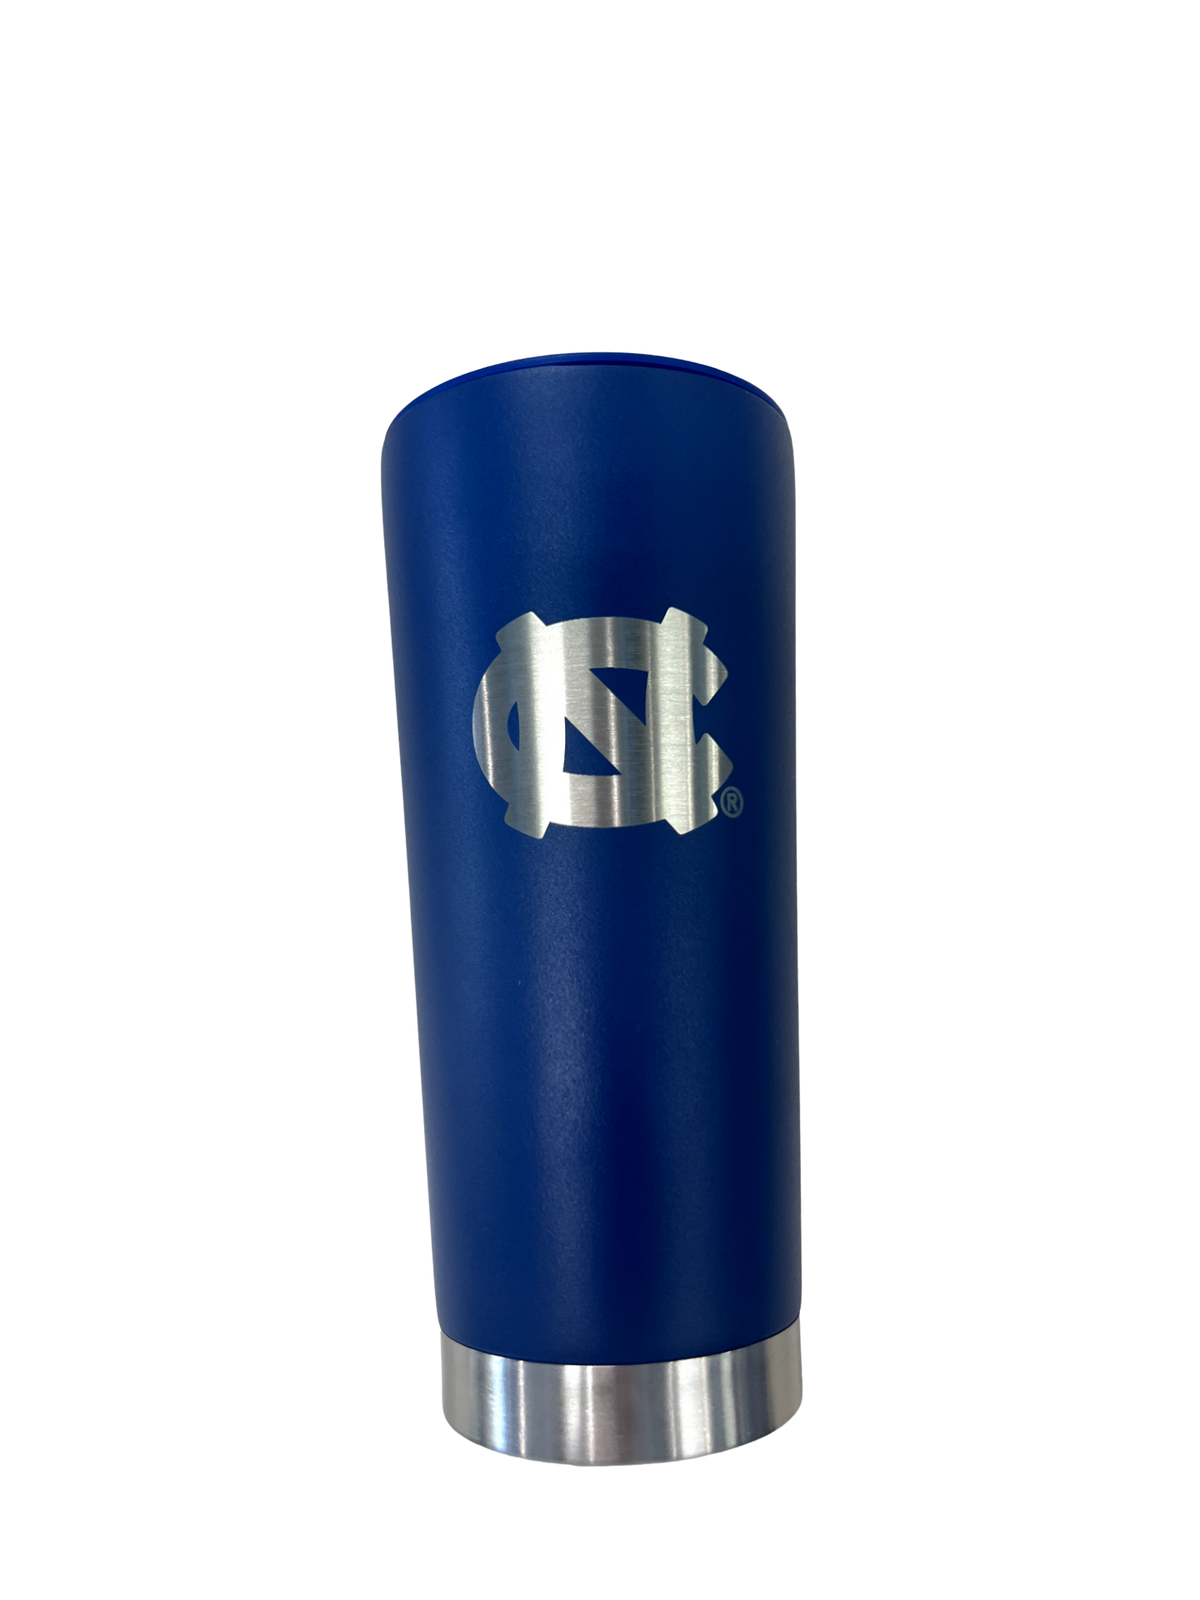 Insulated Stainless Steel Blue UNC Cup